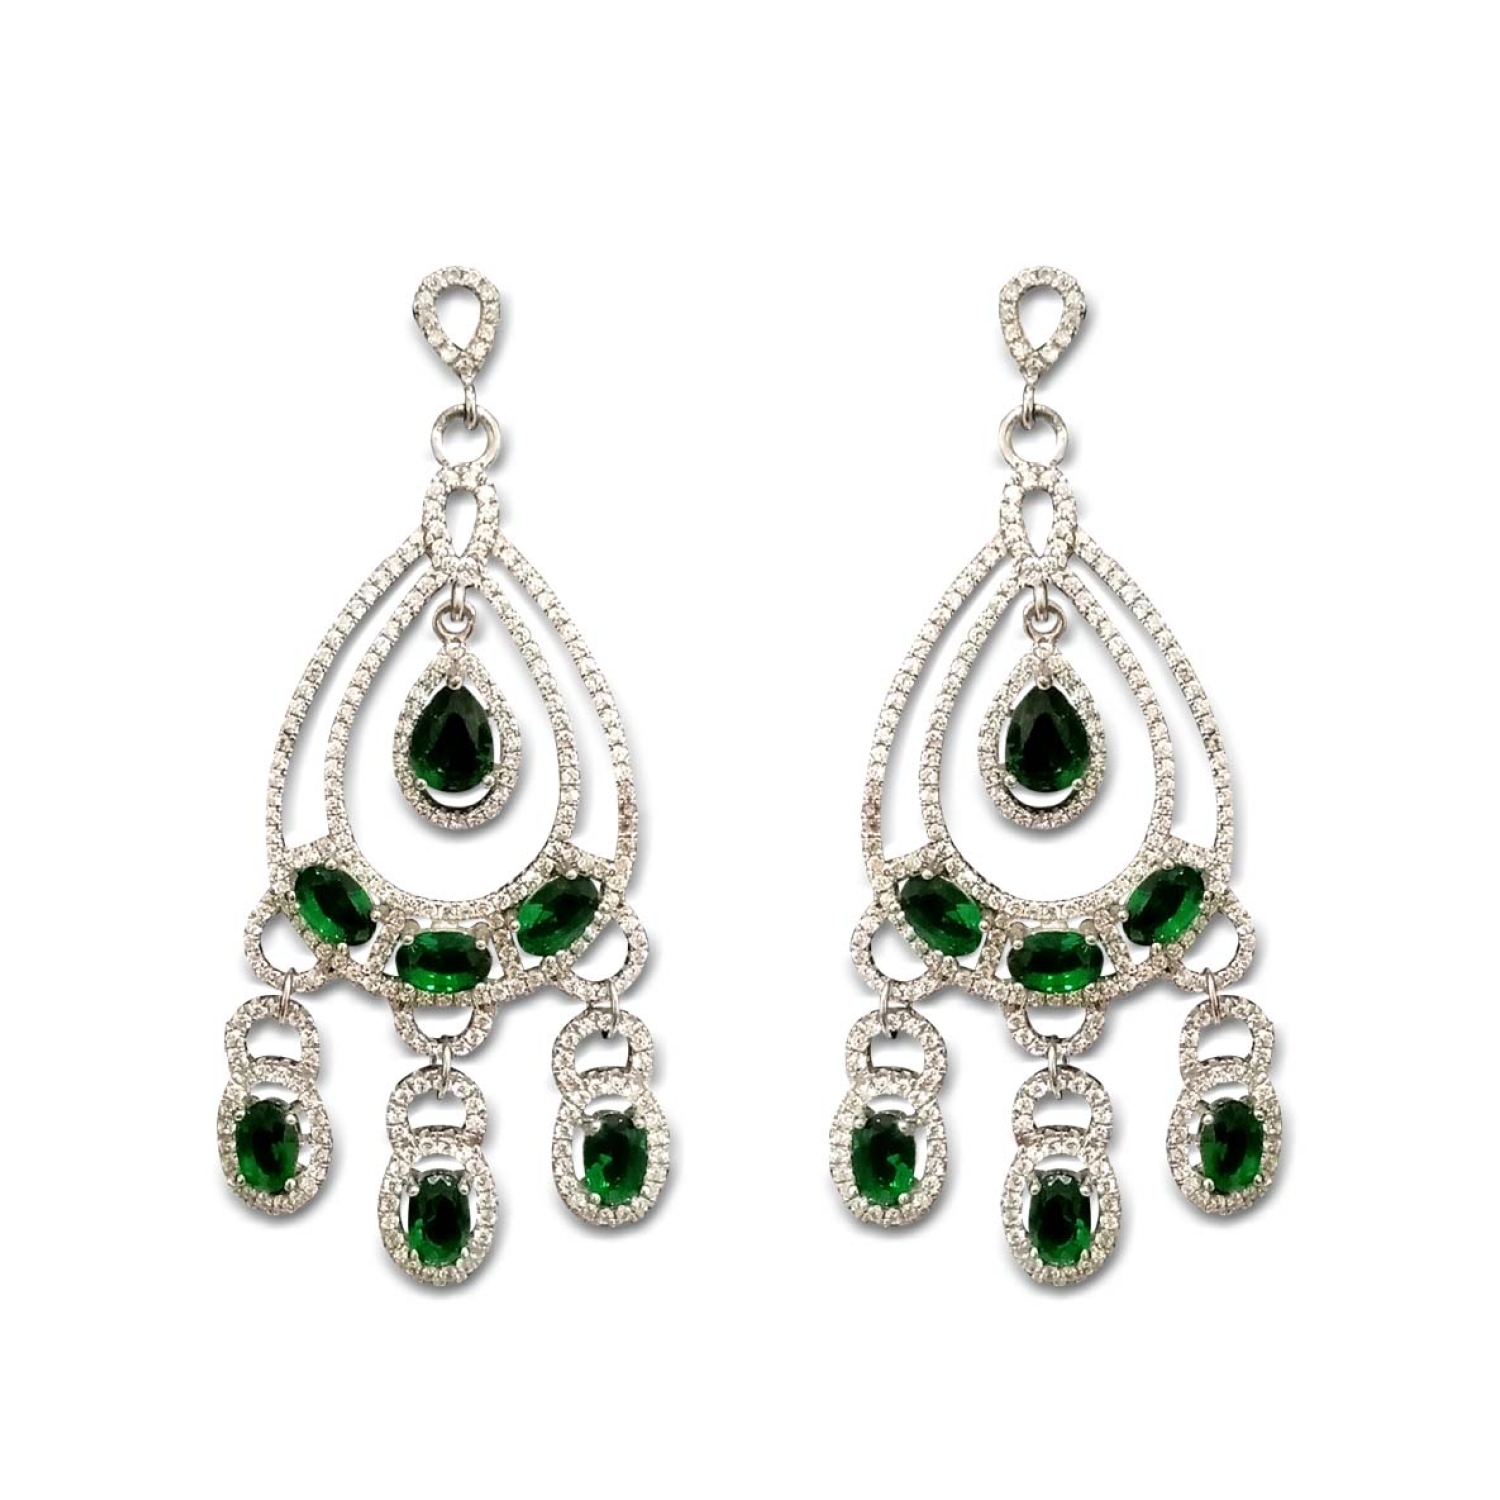 Buy Artificial Earrings for Women Online at Ajnaa Jewels